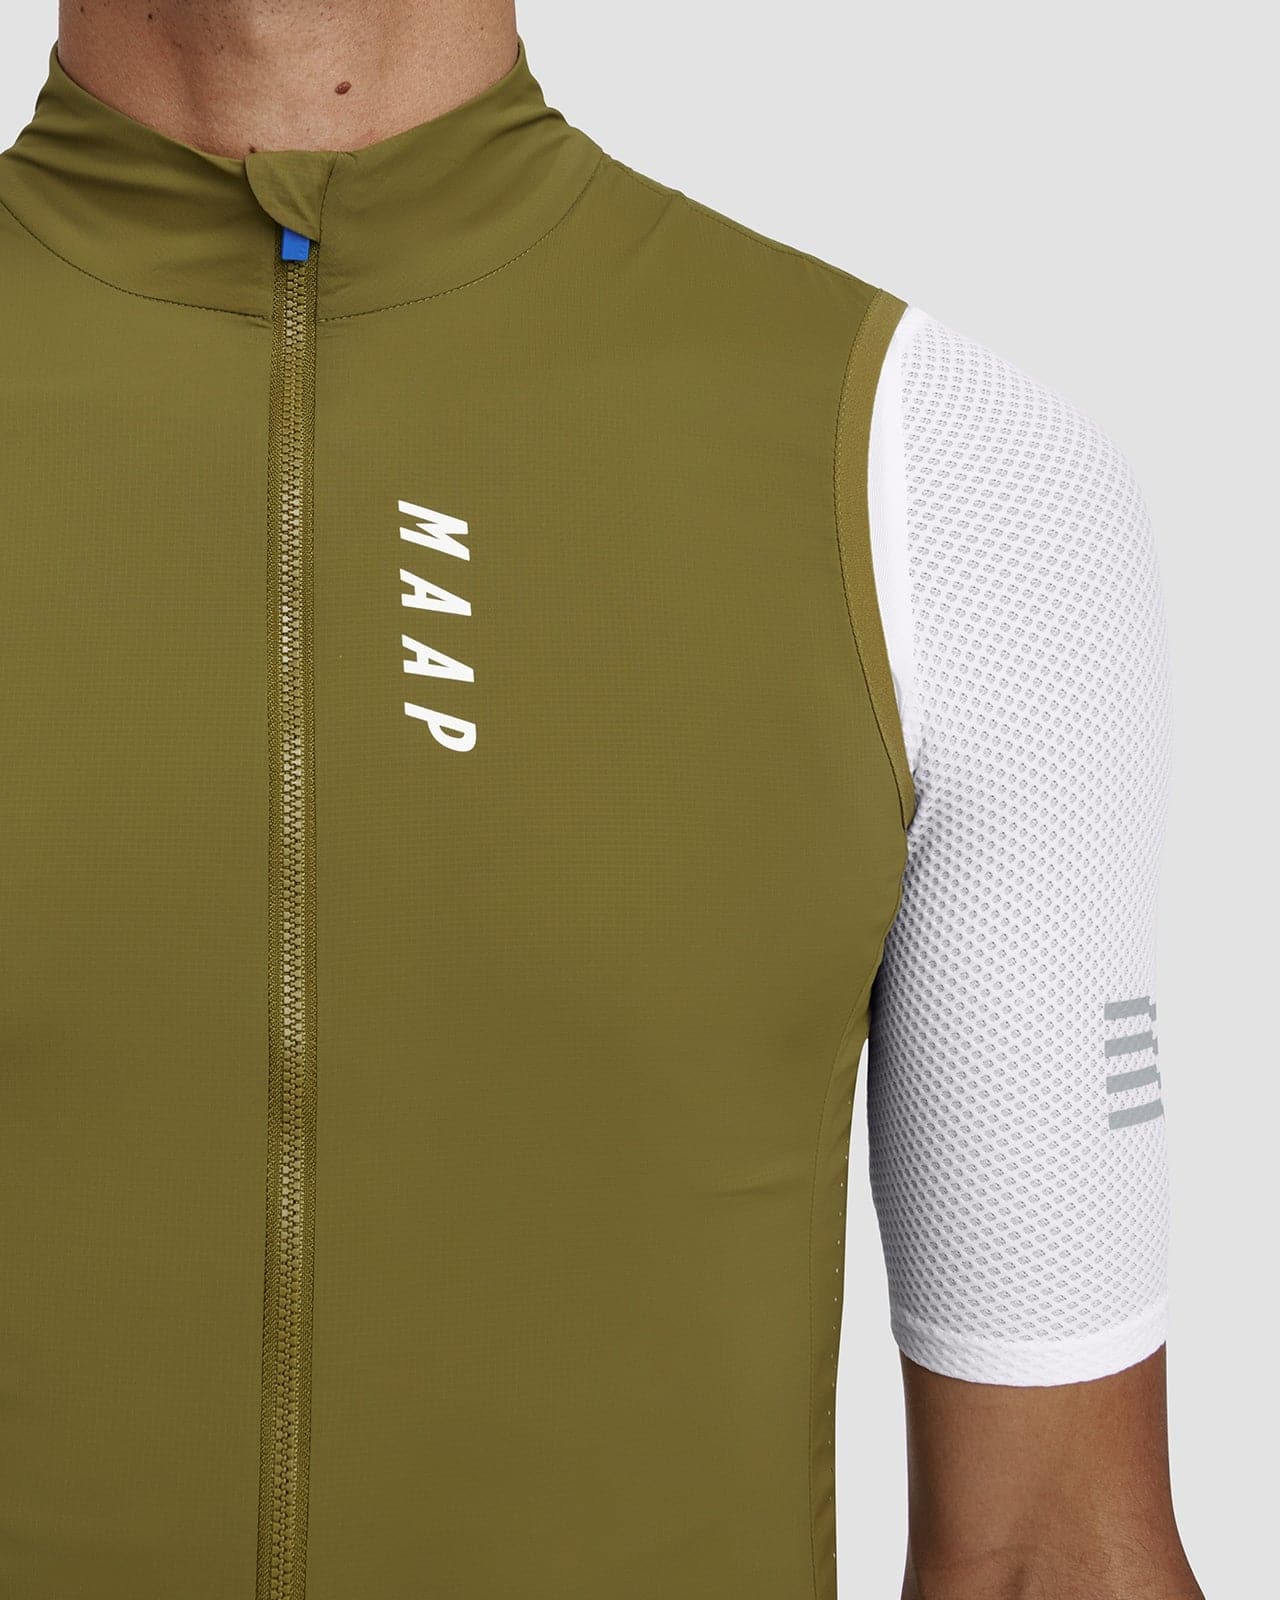 Maap Atmos Vest - Chaleco ciclismo - Hombre